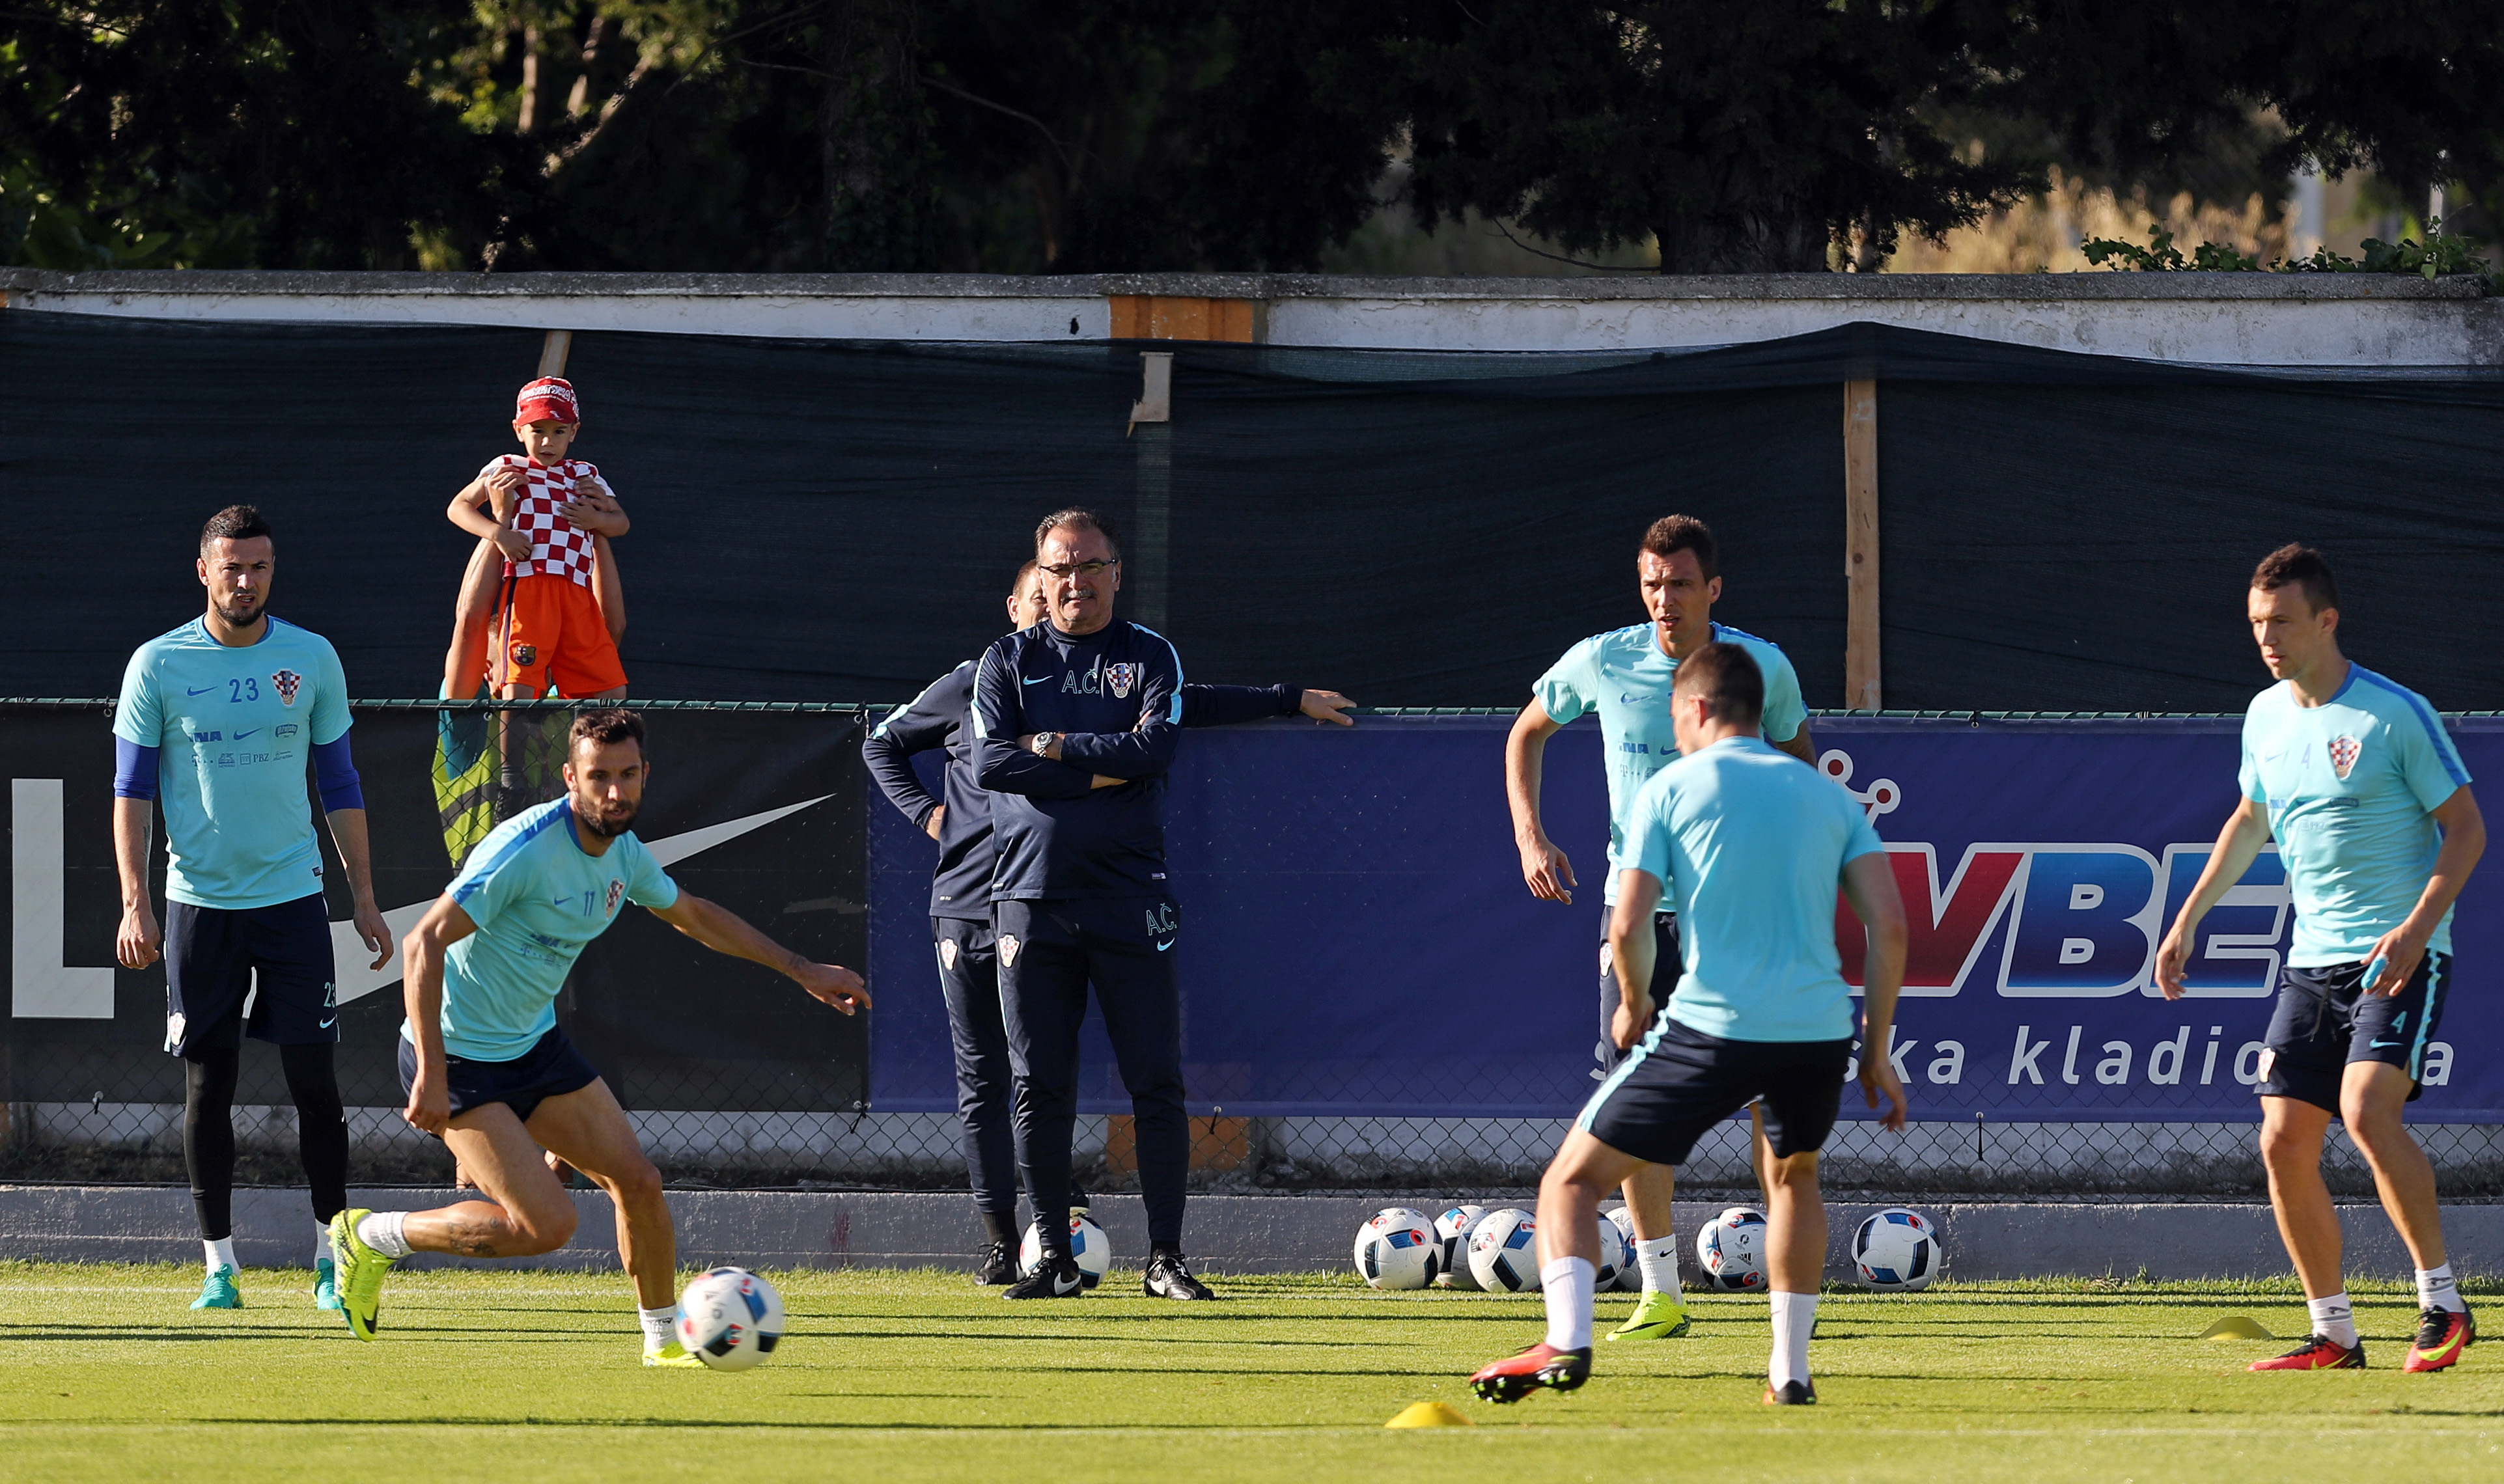 Croatia's national team head coach Ante Cacic (C) looks at his players during a training session in Rovinj on June 1, 2016. Real Madrid's midfielder Luka Modric and Barcelona's Ivan Rakitic will lead the Croatian 23-man squad for Euro 2016.  / AFP / STR        (Photo credit should read STR/AFP/Getty Images)